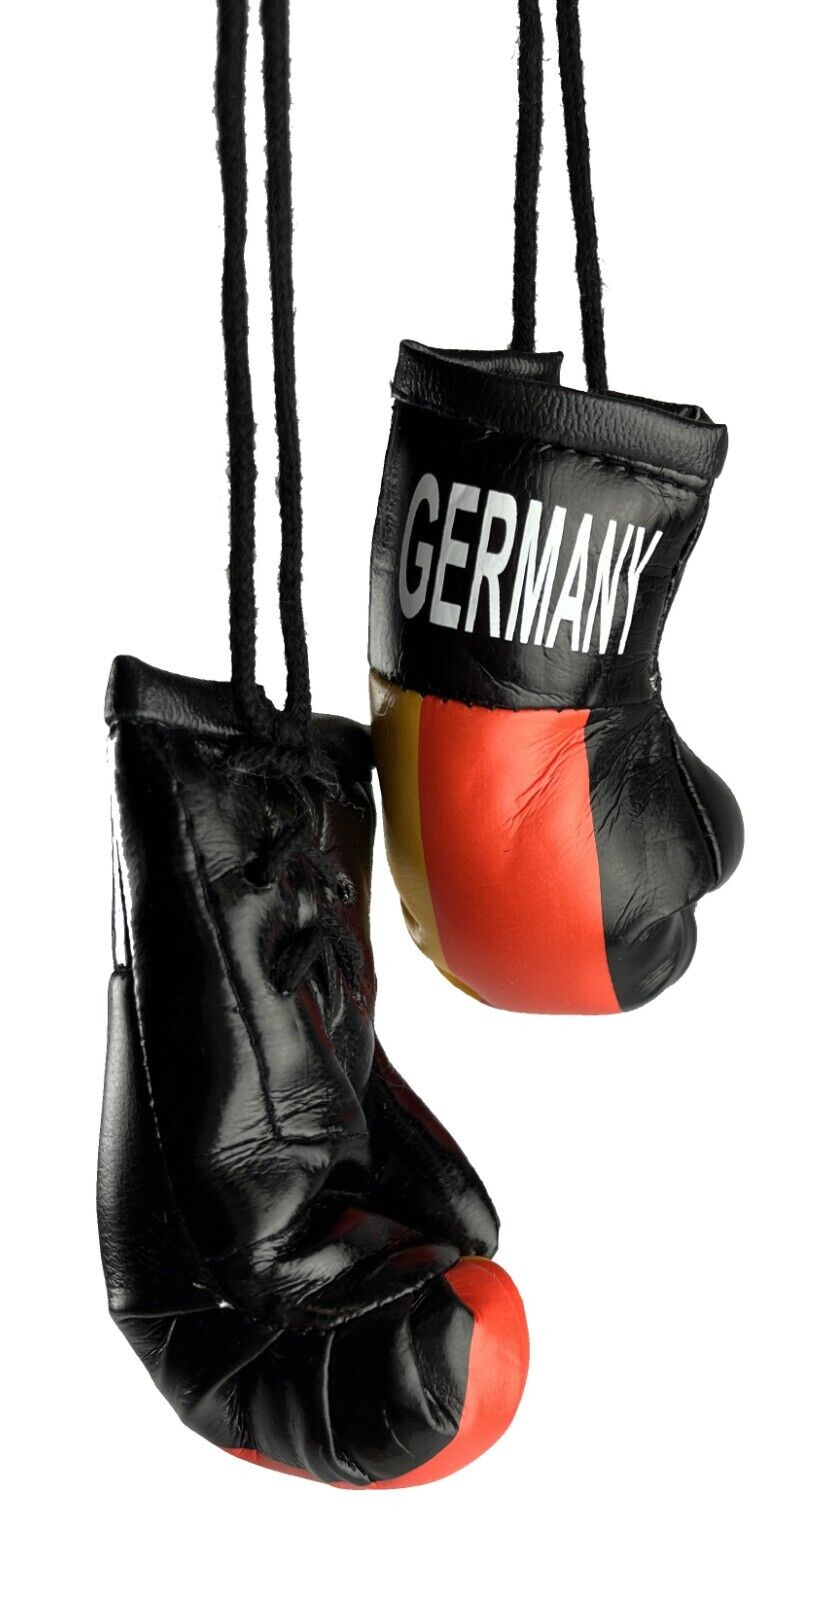 Lot of 100 Mini Boxing Gloves Wholesale GERMANY National Pride MMA Boxing Gloves